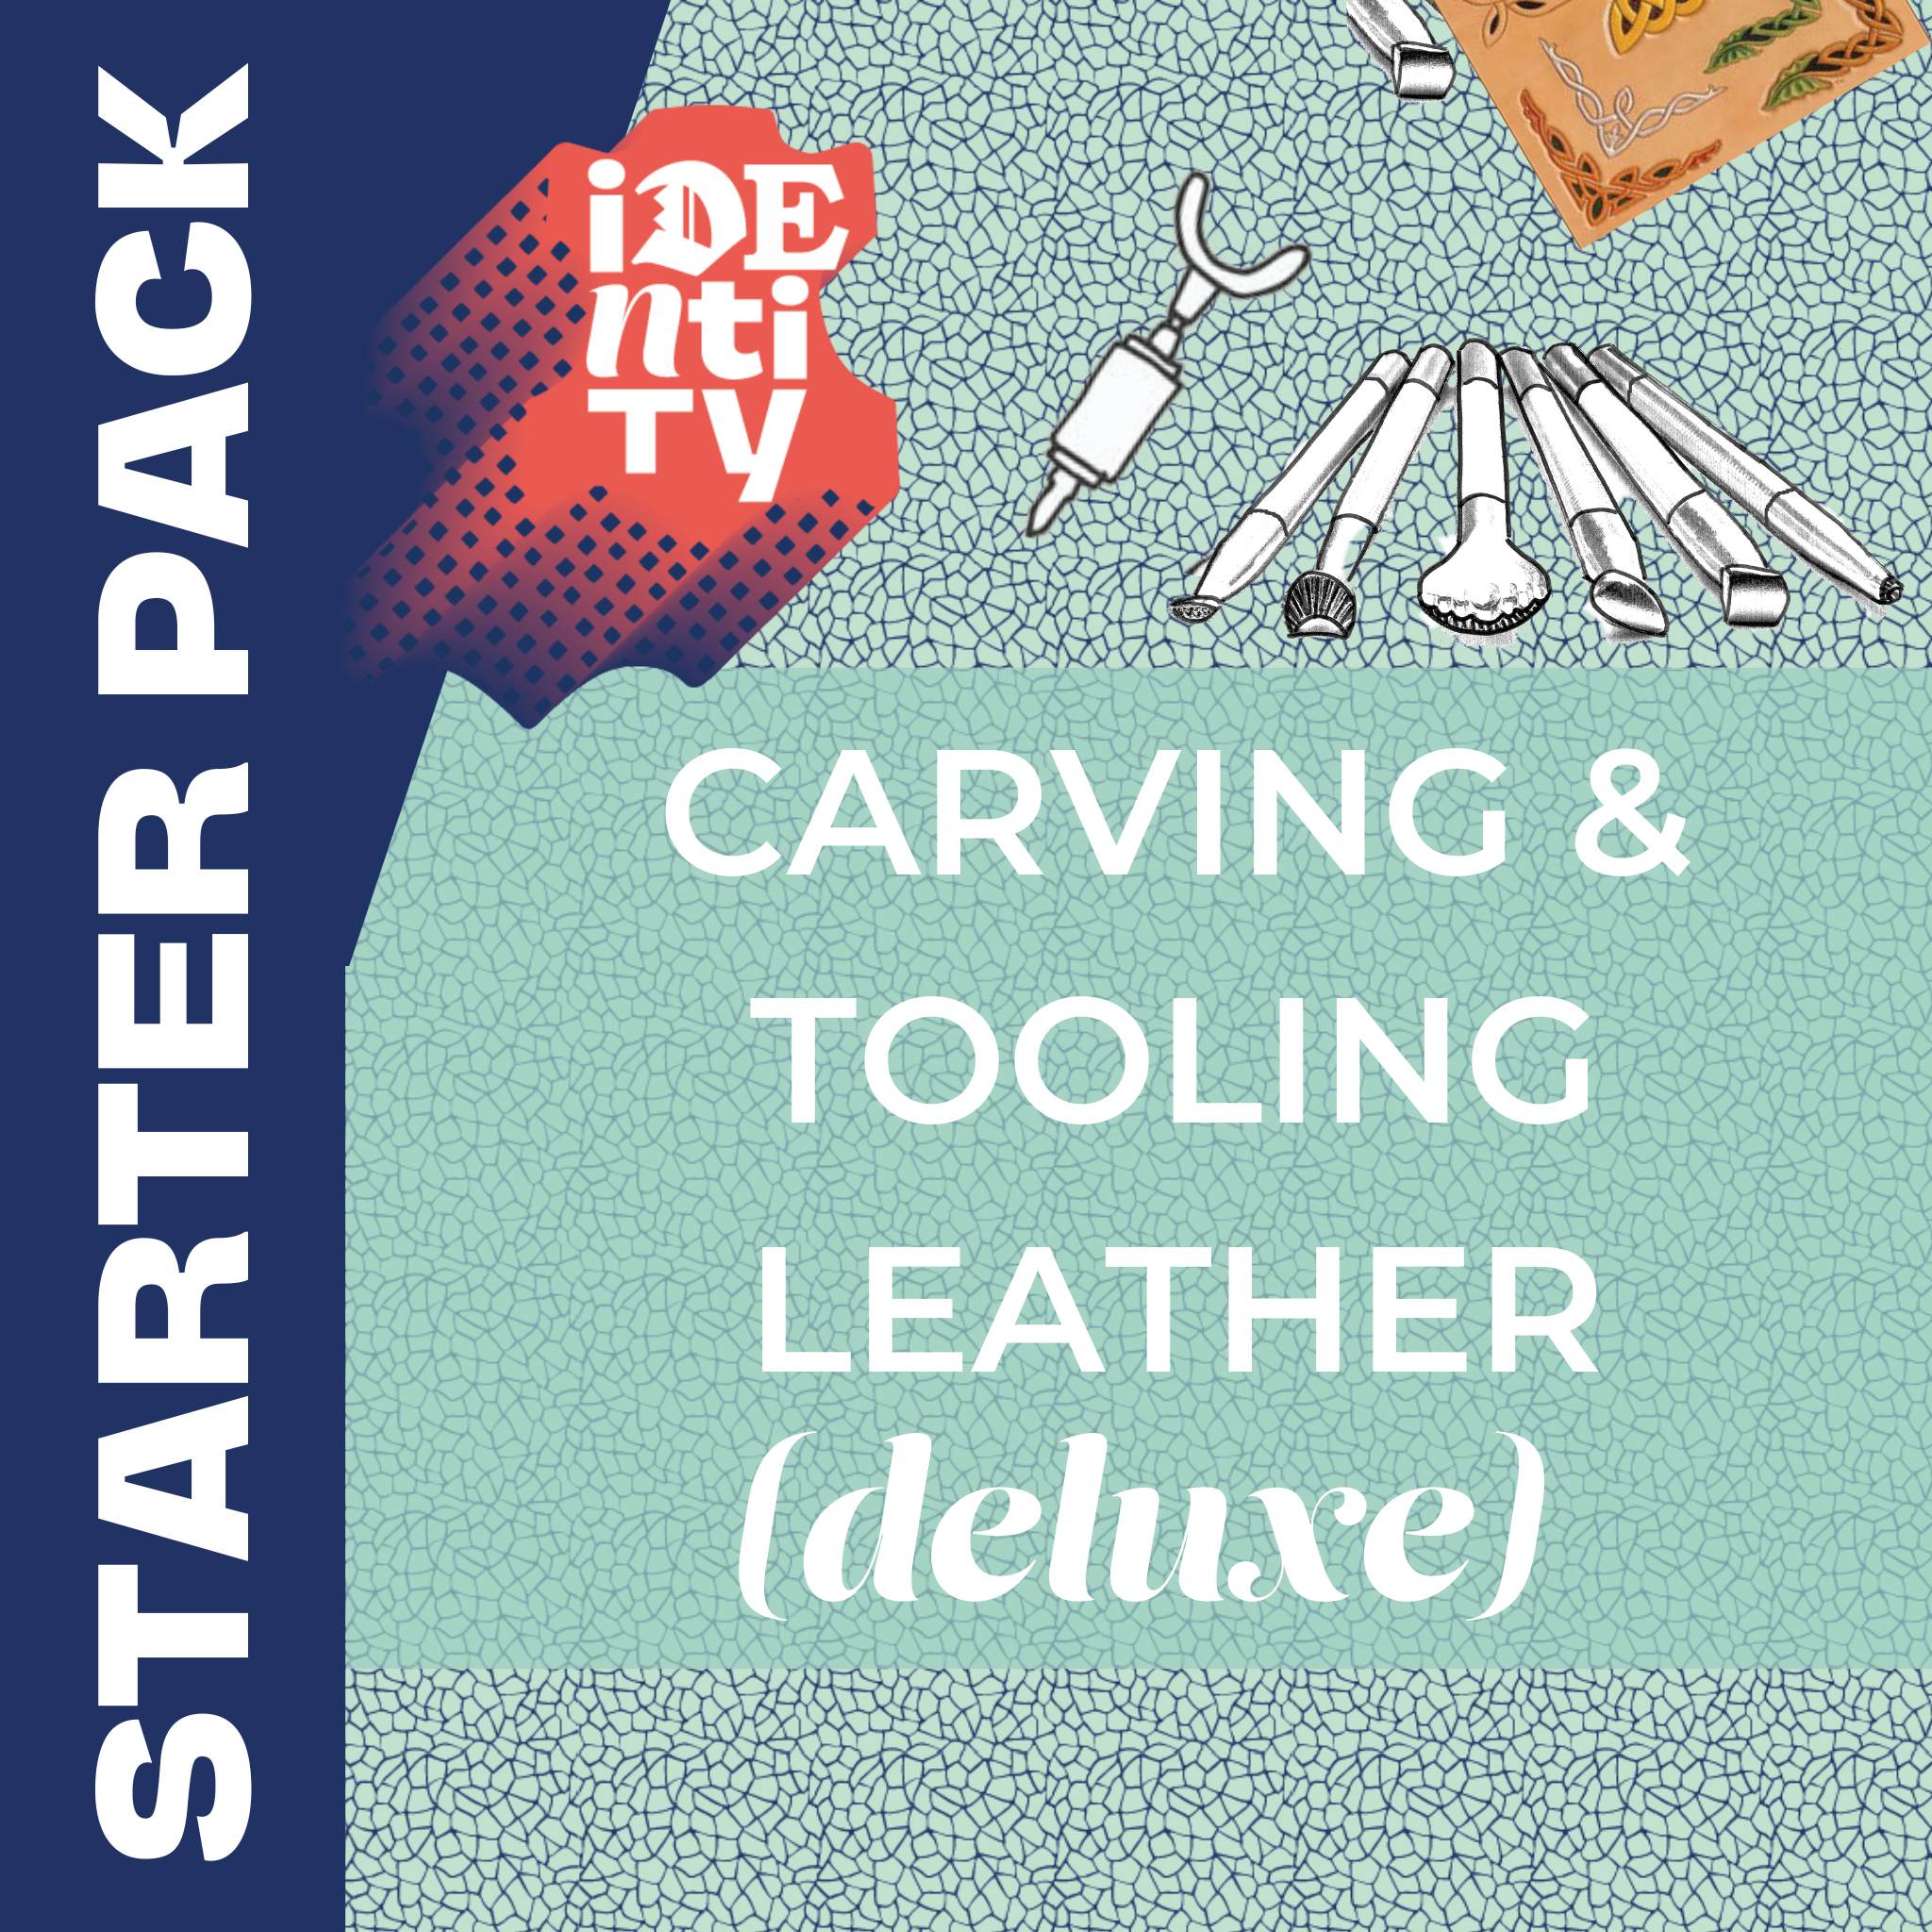 This comprehensive pack will give you a great start for carving and tooling leather and comes with Celtic craftaid pattern.  It comes in a neat drawstring cotton bag with a Guide to Carving & Tooling and a FREE template and instructions for making a carved Leaf coaster.  #leathercarving #decoratingleather #vegetabletannedleather #toolingleather #leathercraft #starterpack #newskills